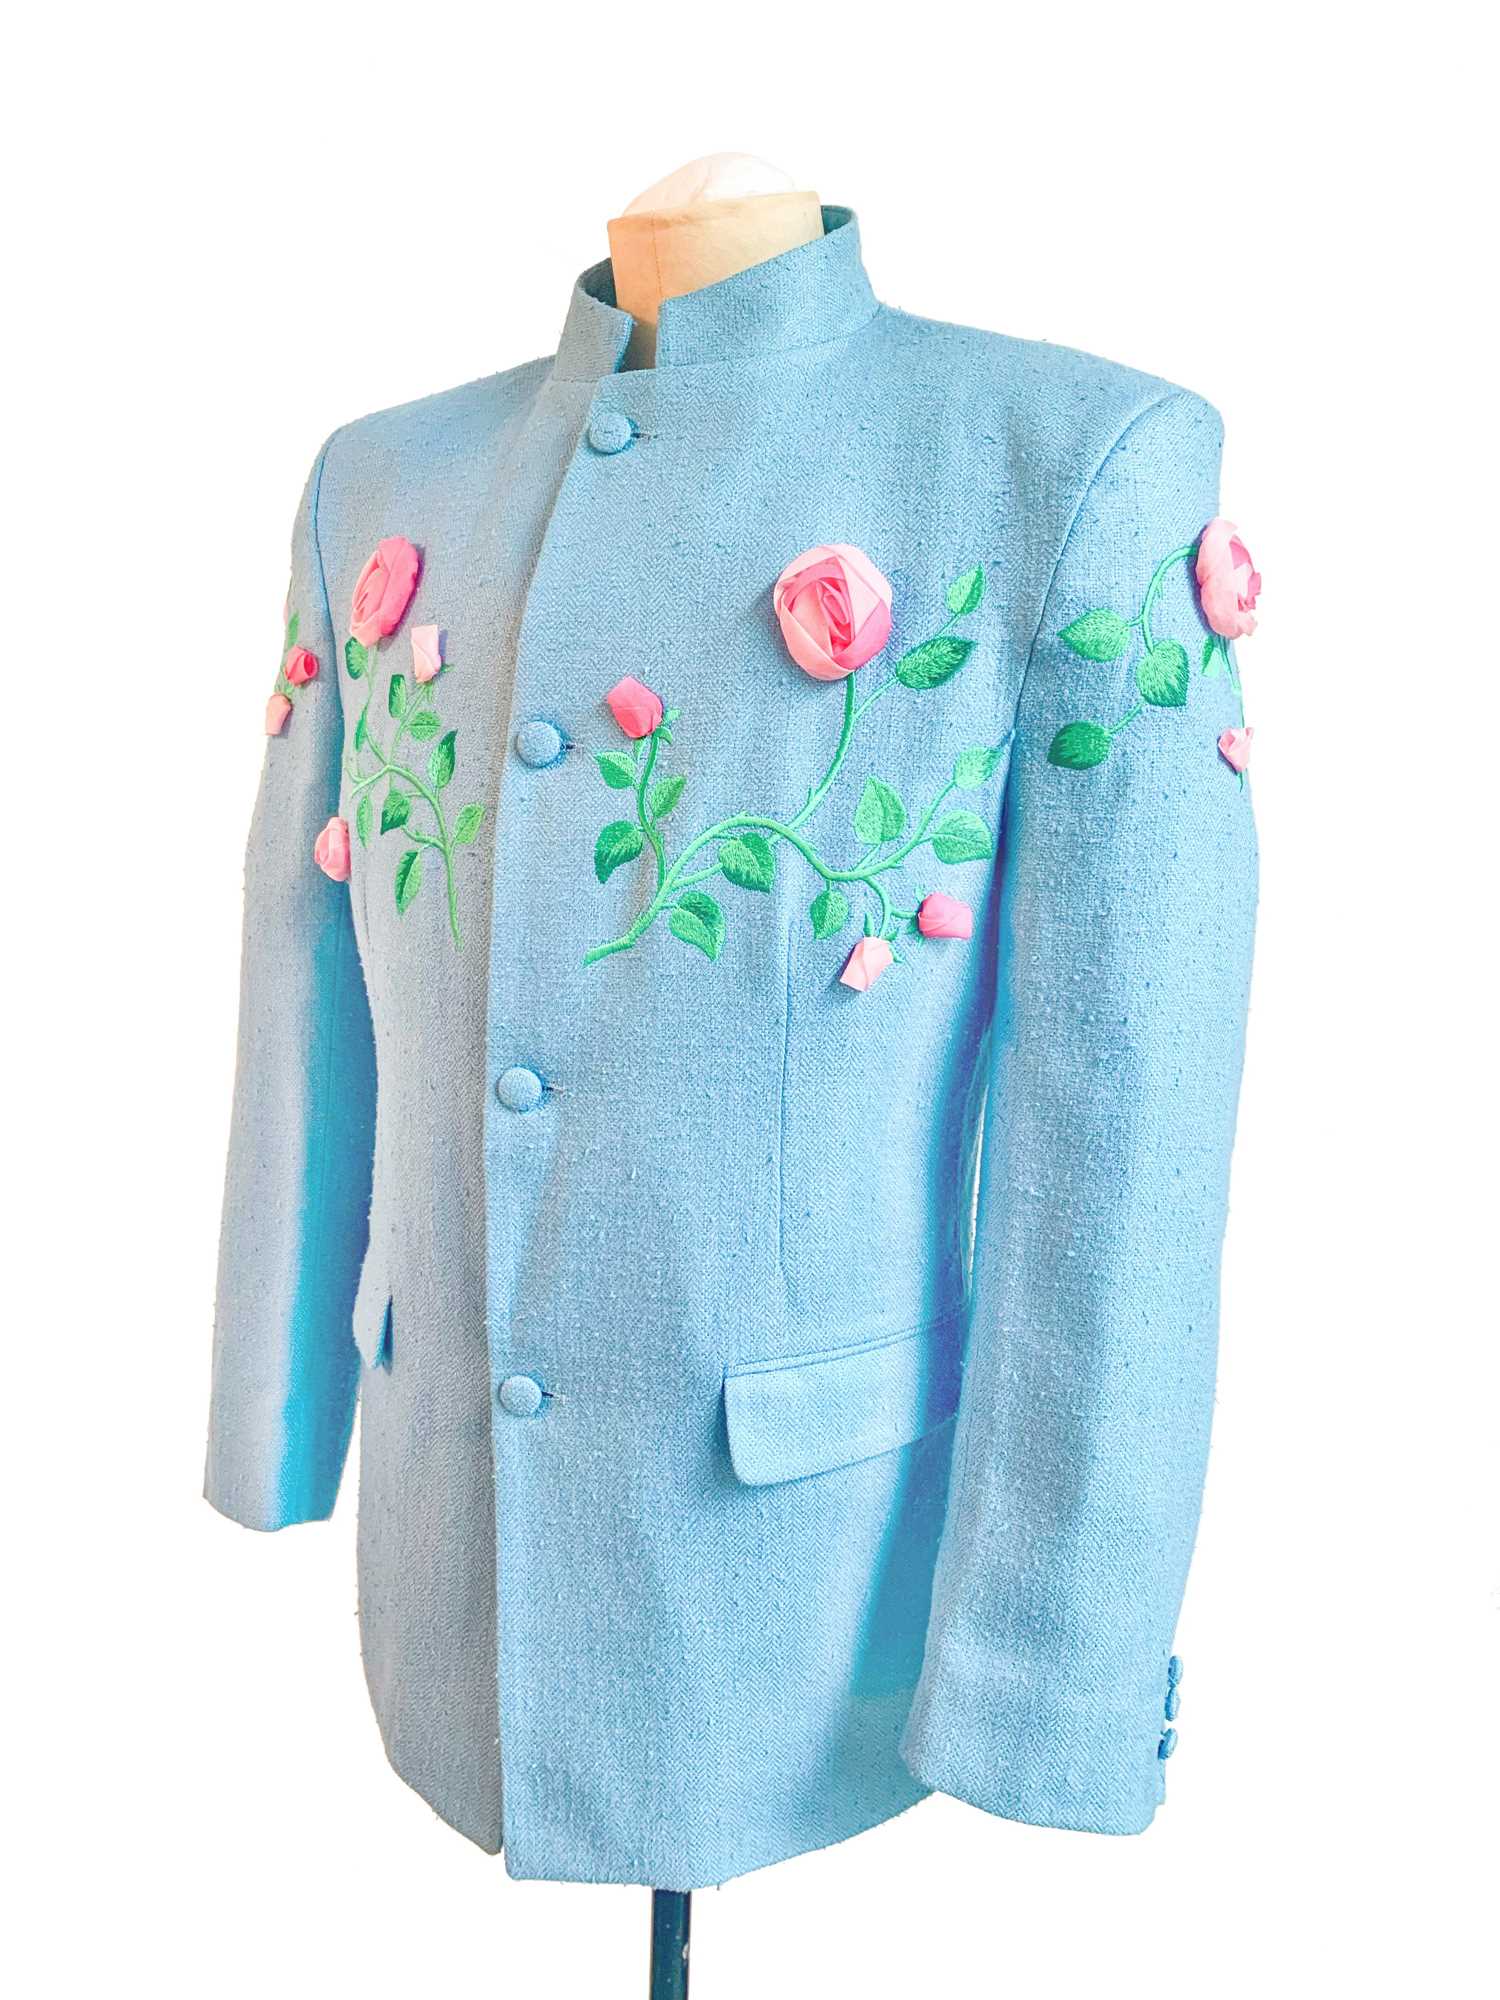 Lot 89 - A rare Richard James embroidered sky-blue silk-blend jacket, 'Cecil Beaton' collection, Spring-Summer 1990